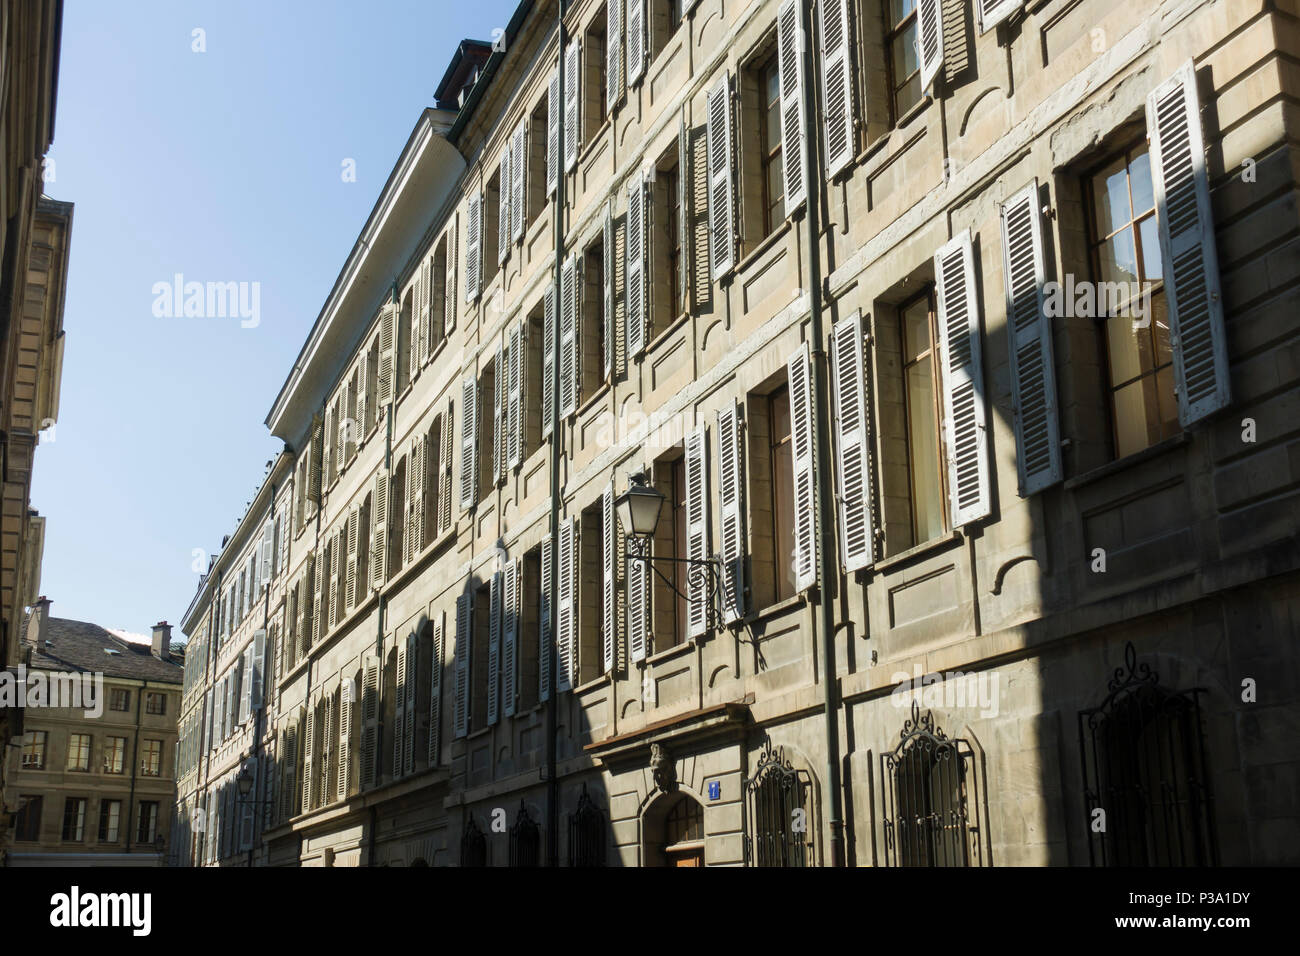 A street of tall stone-fronted buildings in the medieval old town / Cite of Geneva / Geneve, Switzerland. Stock Photo